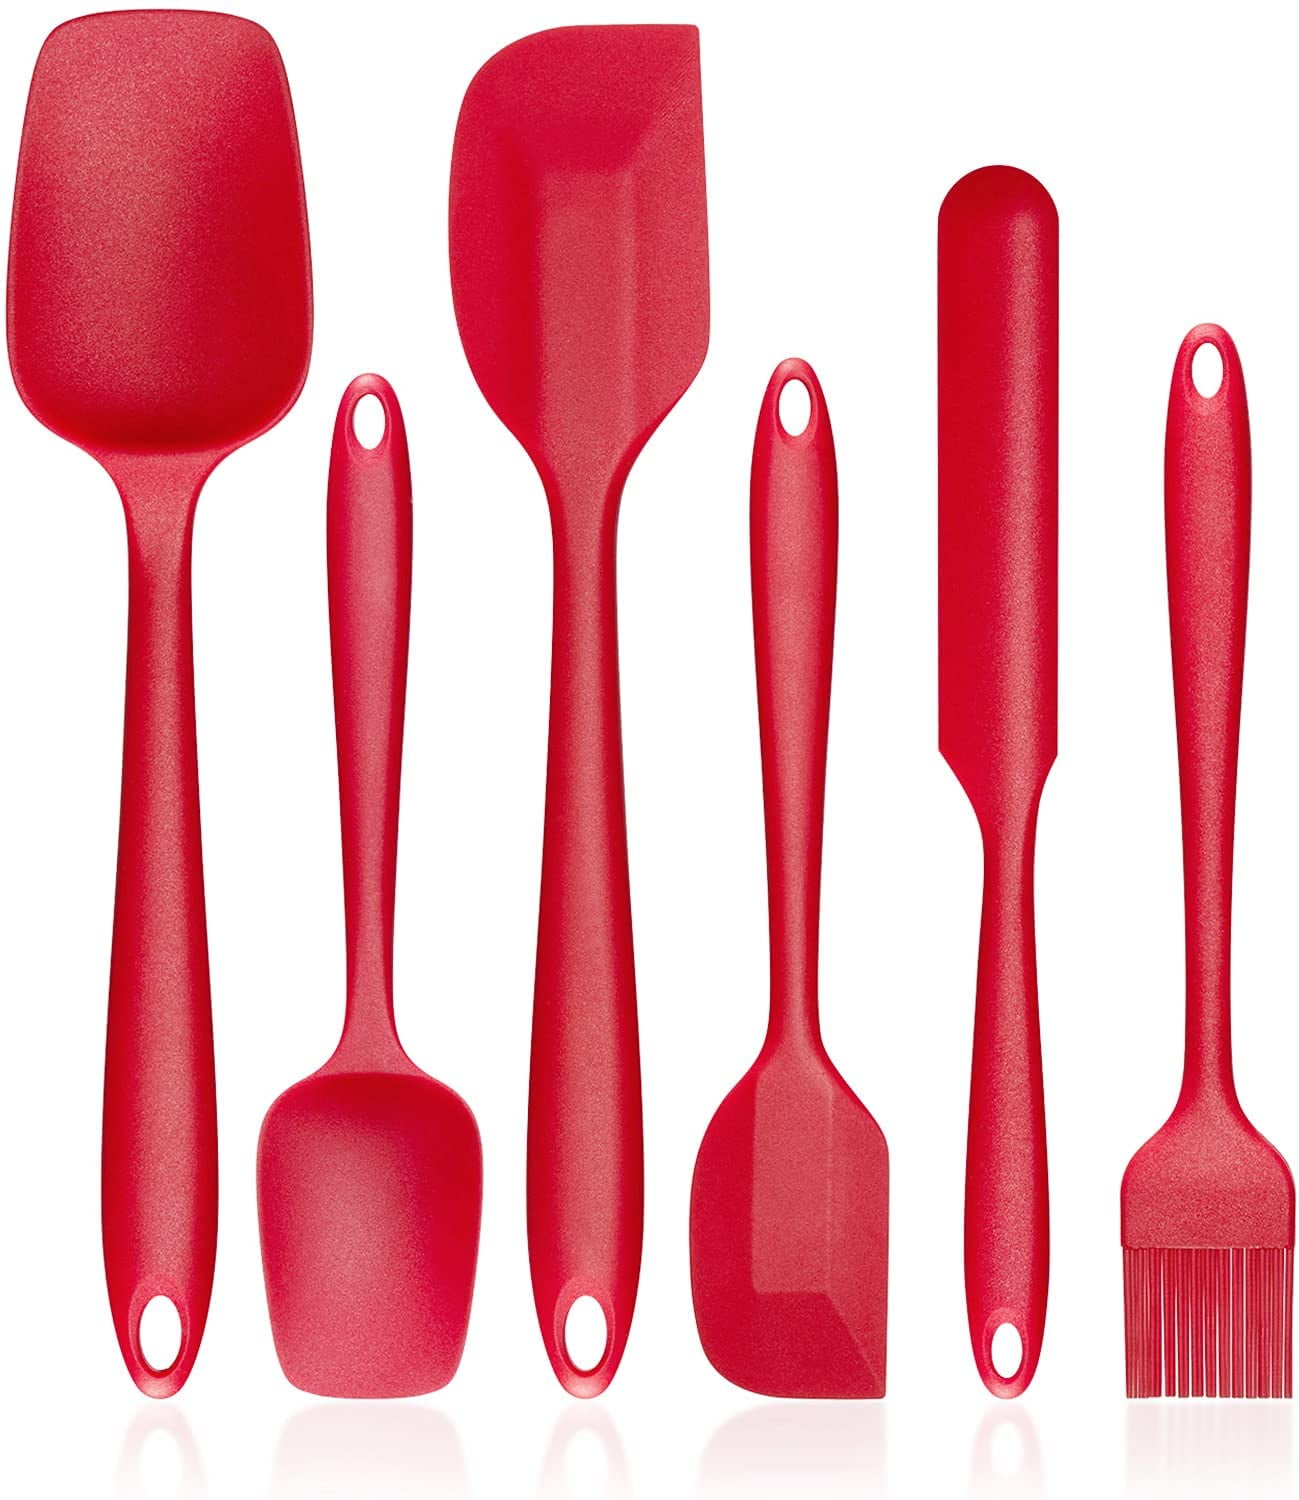 Details about   Silicone Heat Resistant Non-stick Rubber Spatula Spoon Kitchen Cooking Tool #^~